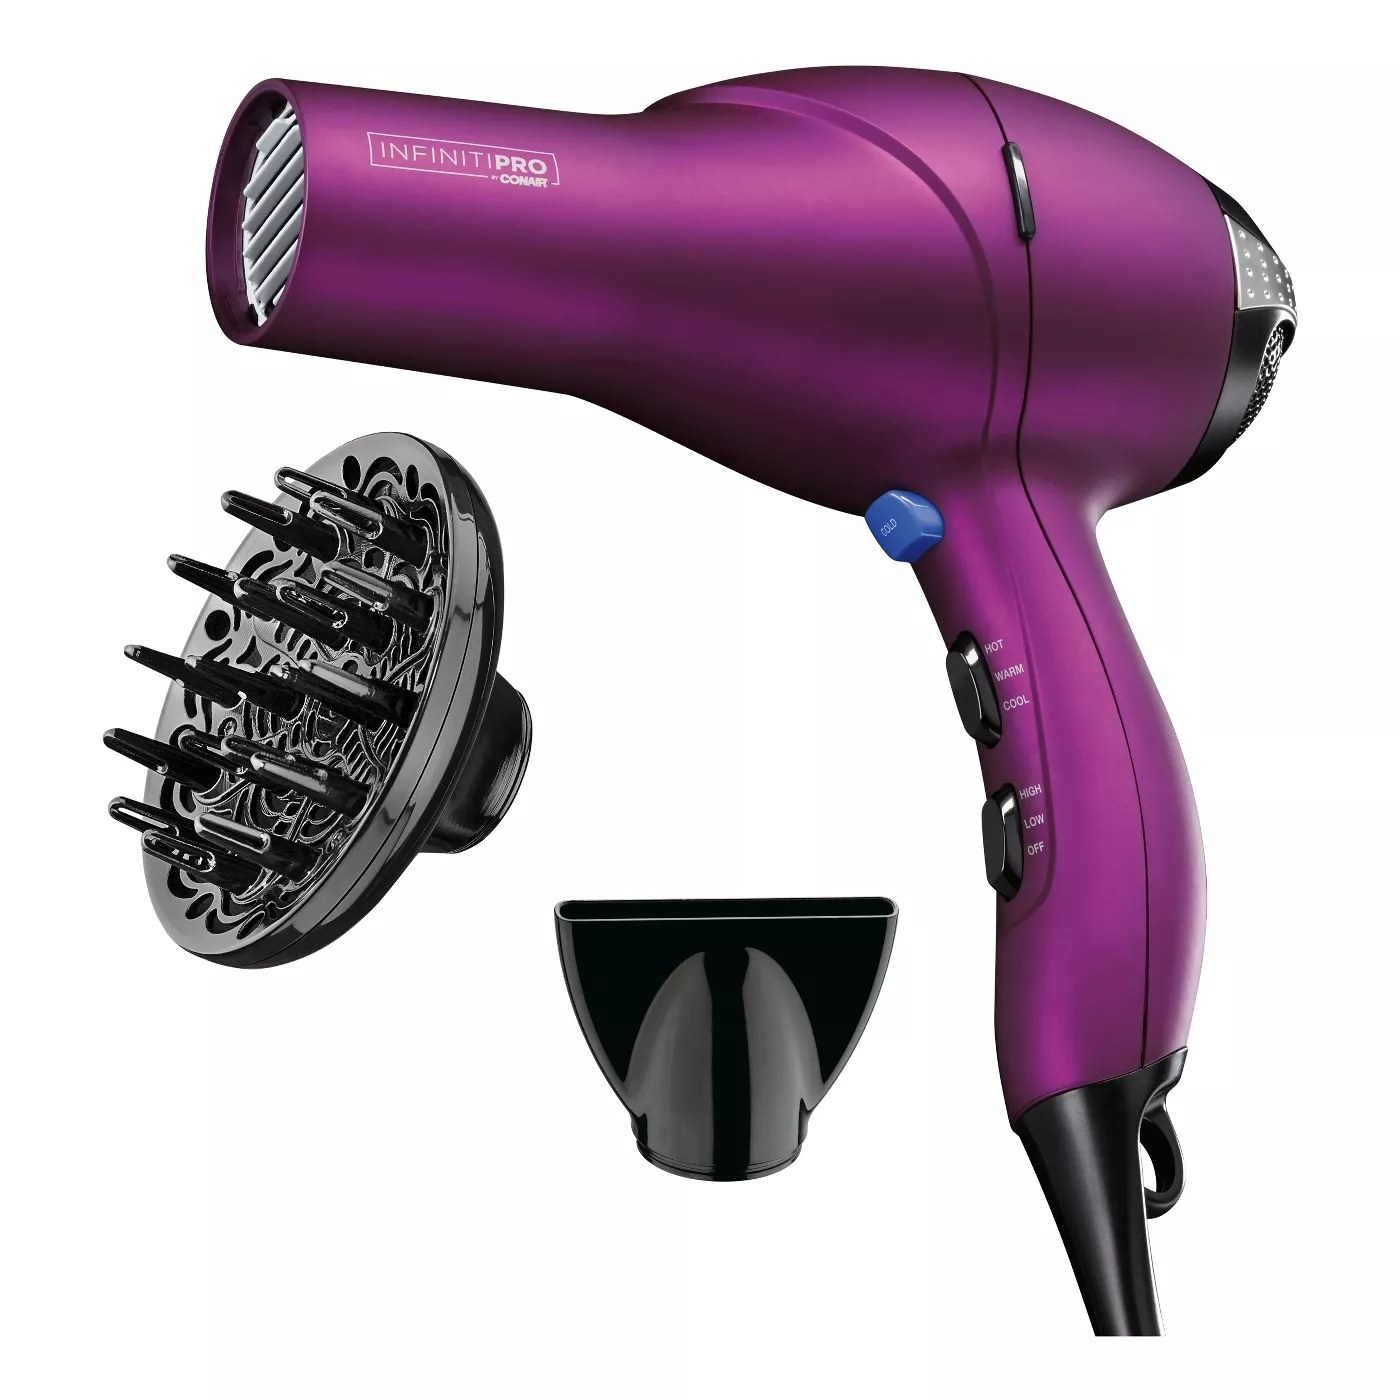 The purple hairdryer with two separate attachments — concentrator and diffuser